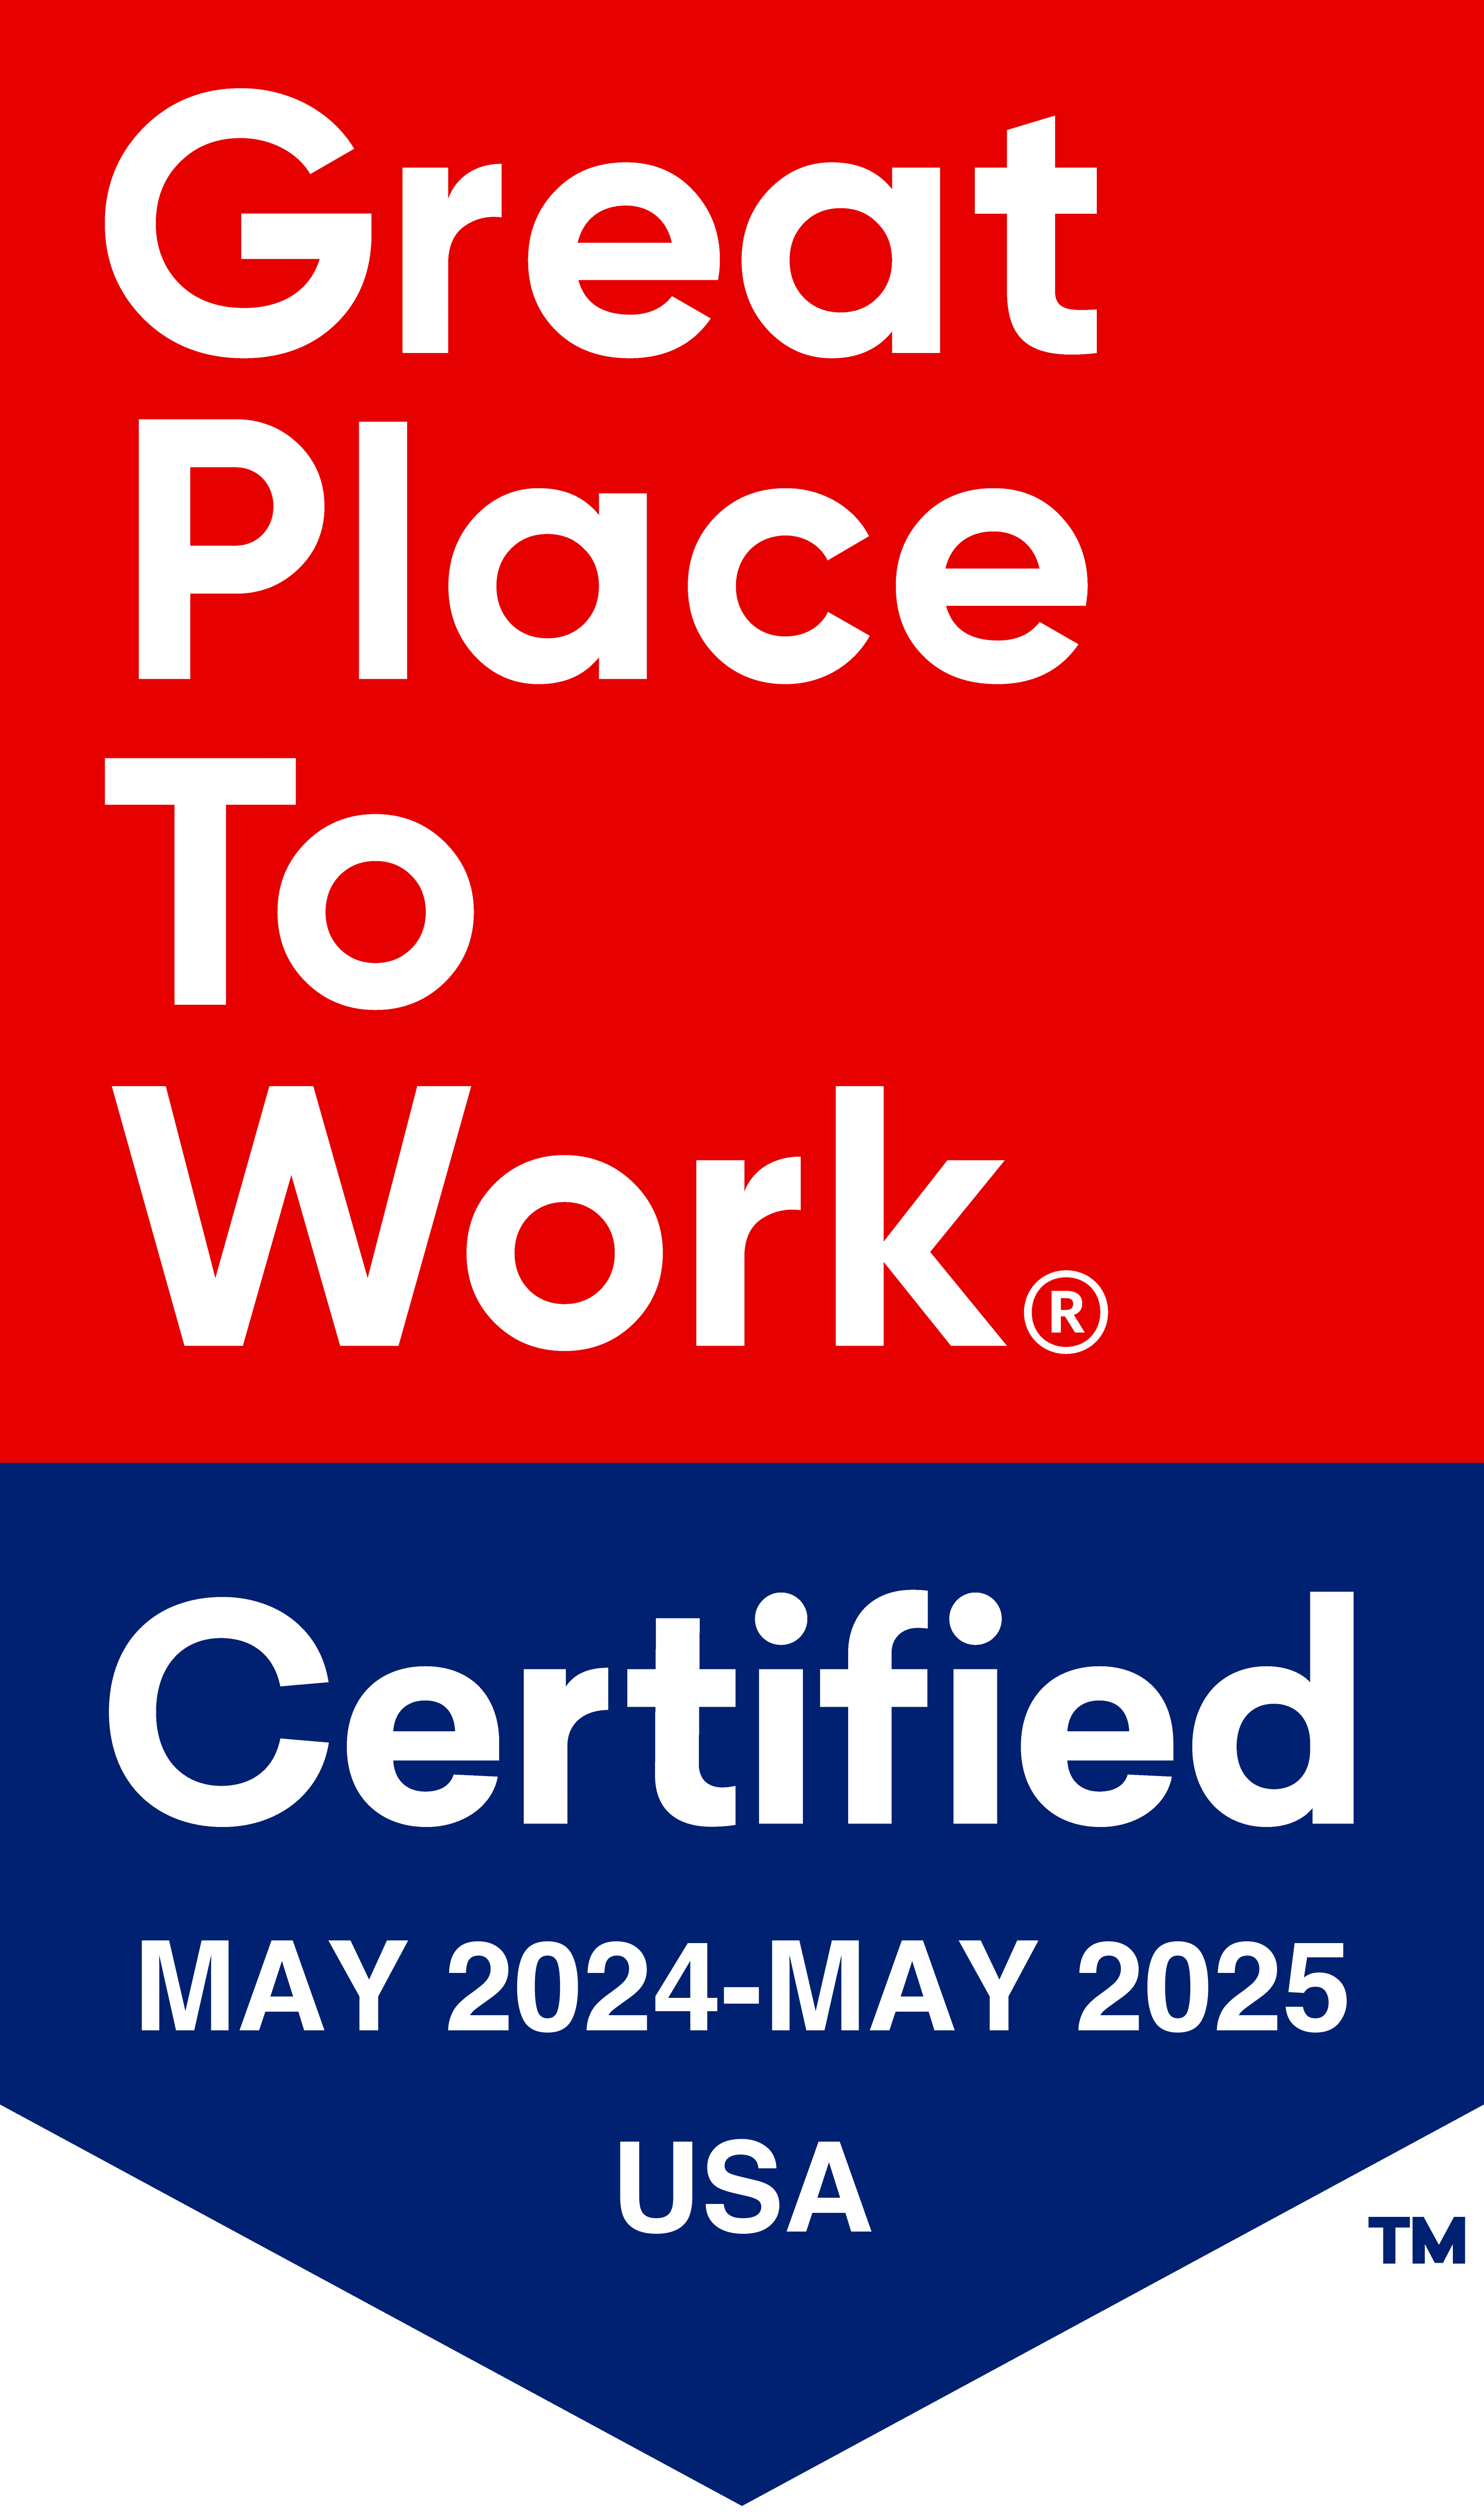 Great place to work logo for Clearwater at Riverpark in Oxnard, California